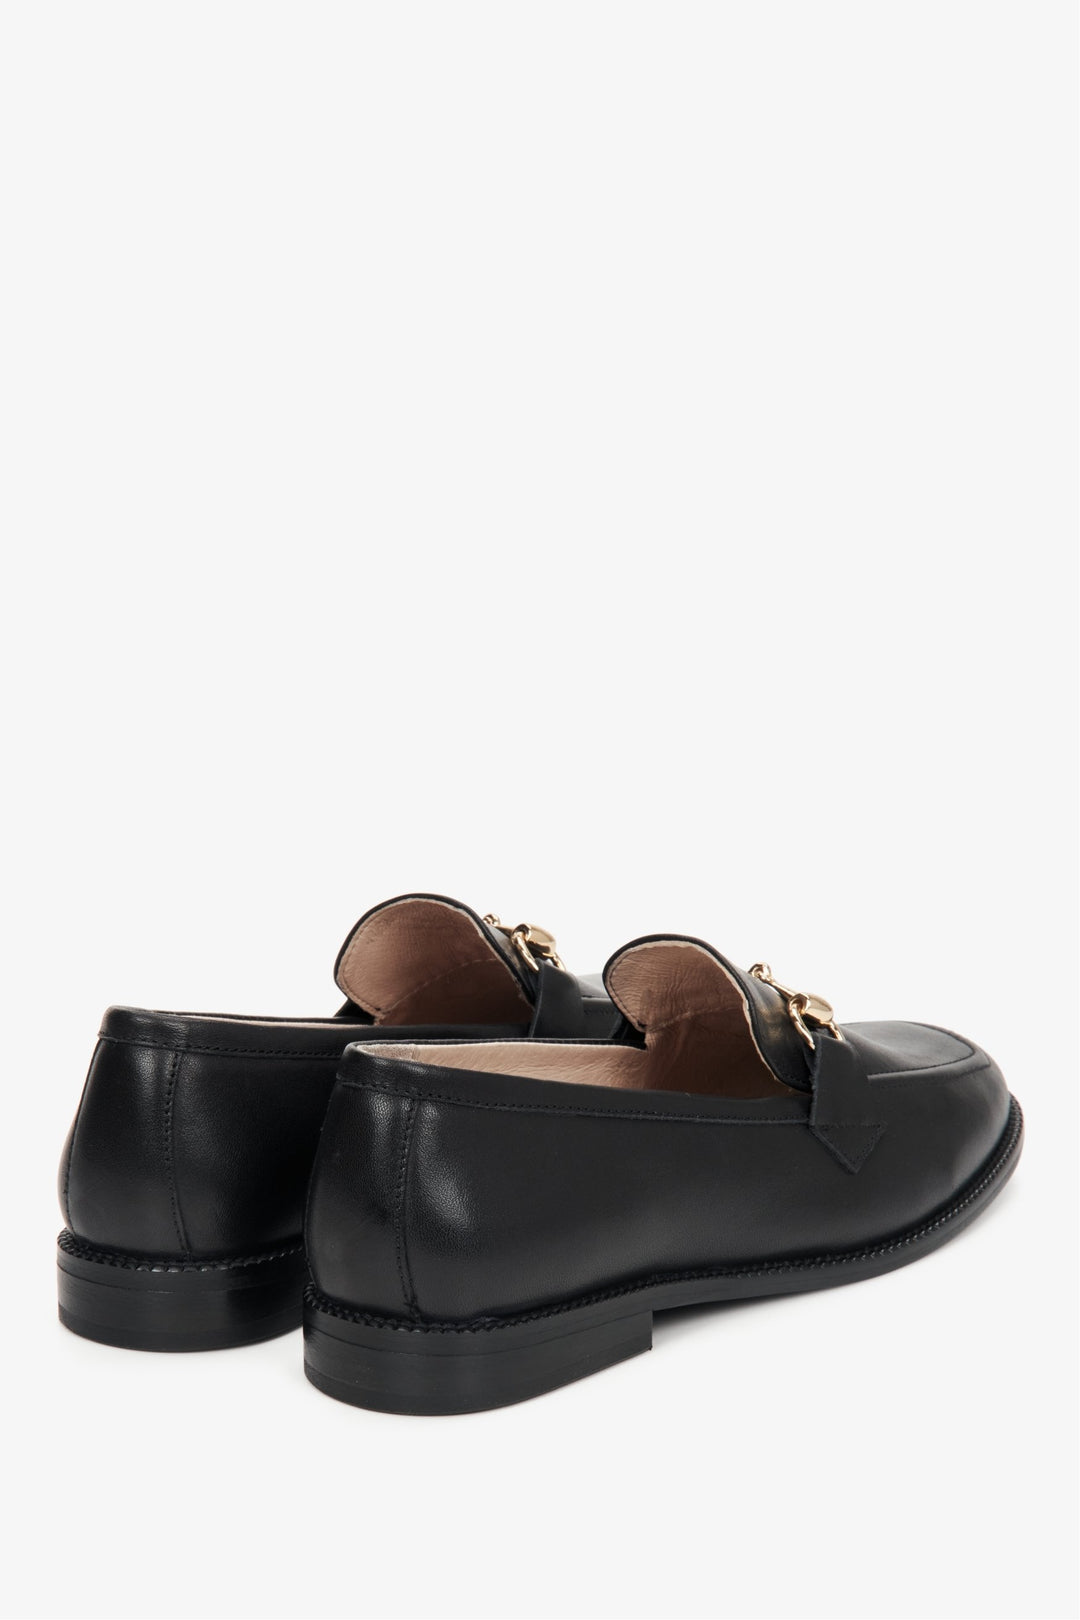 Women's black leather loafers with gold buckle - heel counter.